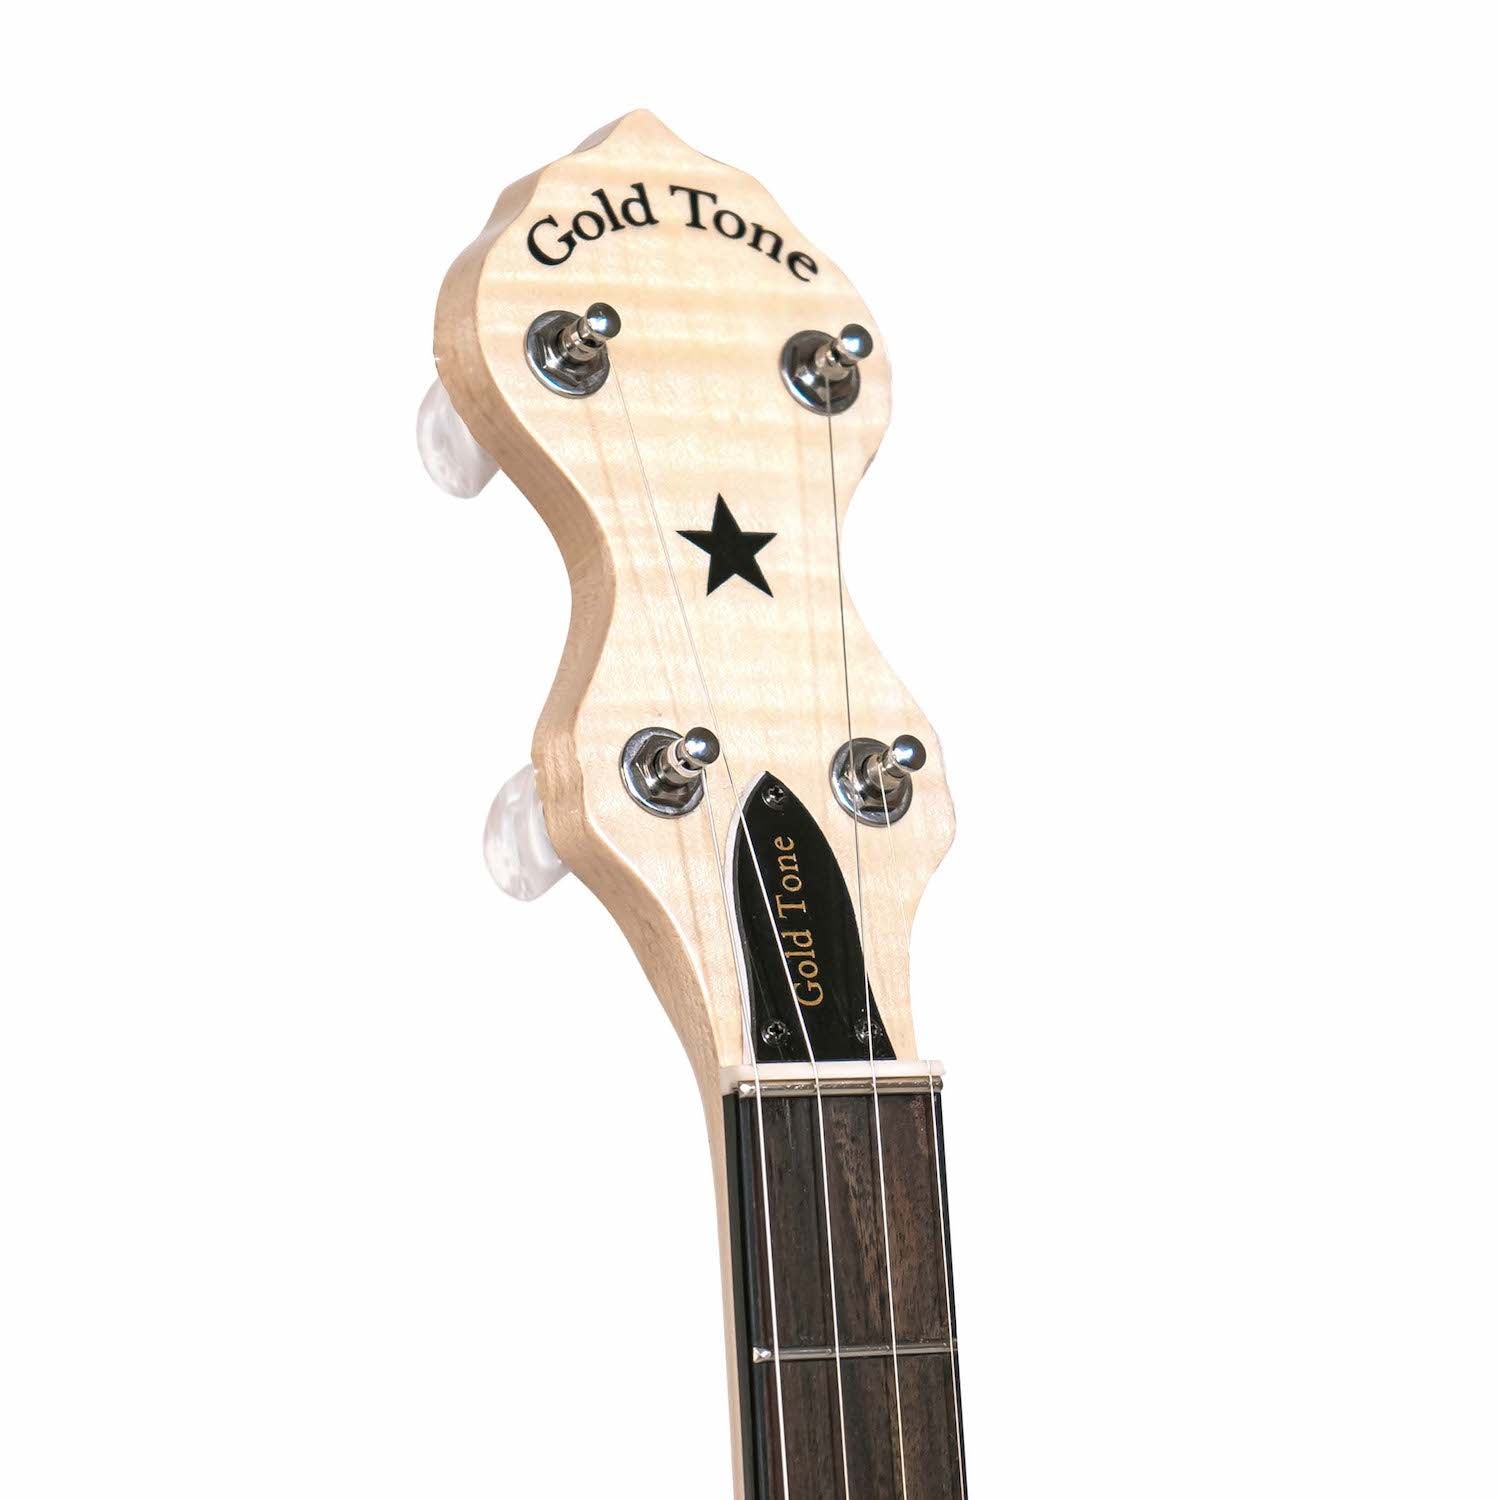 Gold Tone CC-Carlin 12 Planetary tuners with bag